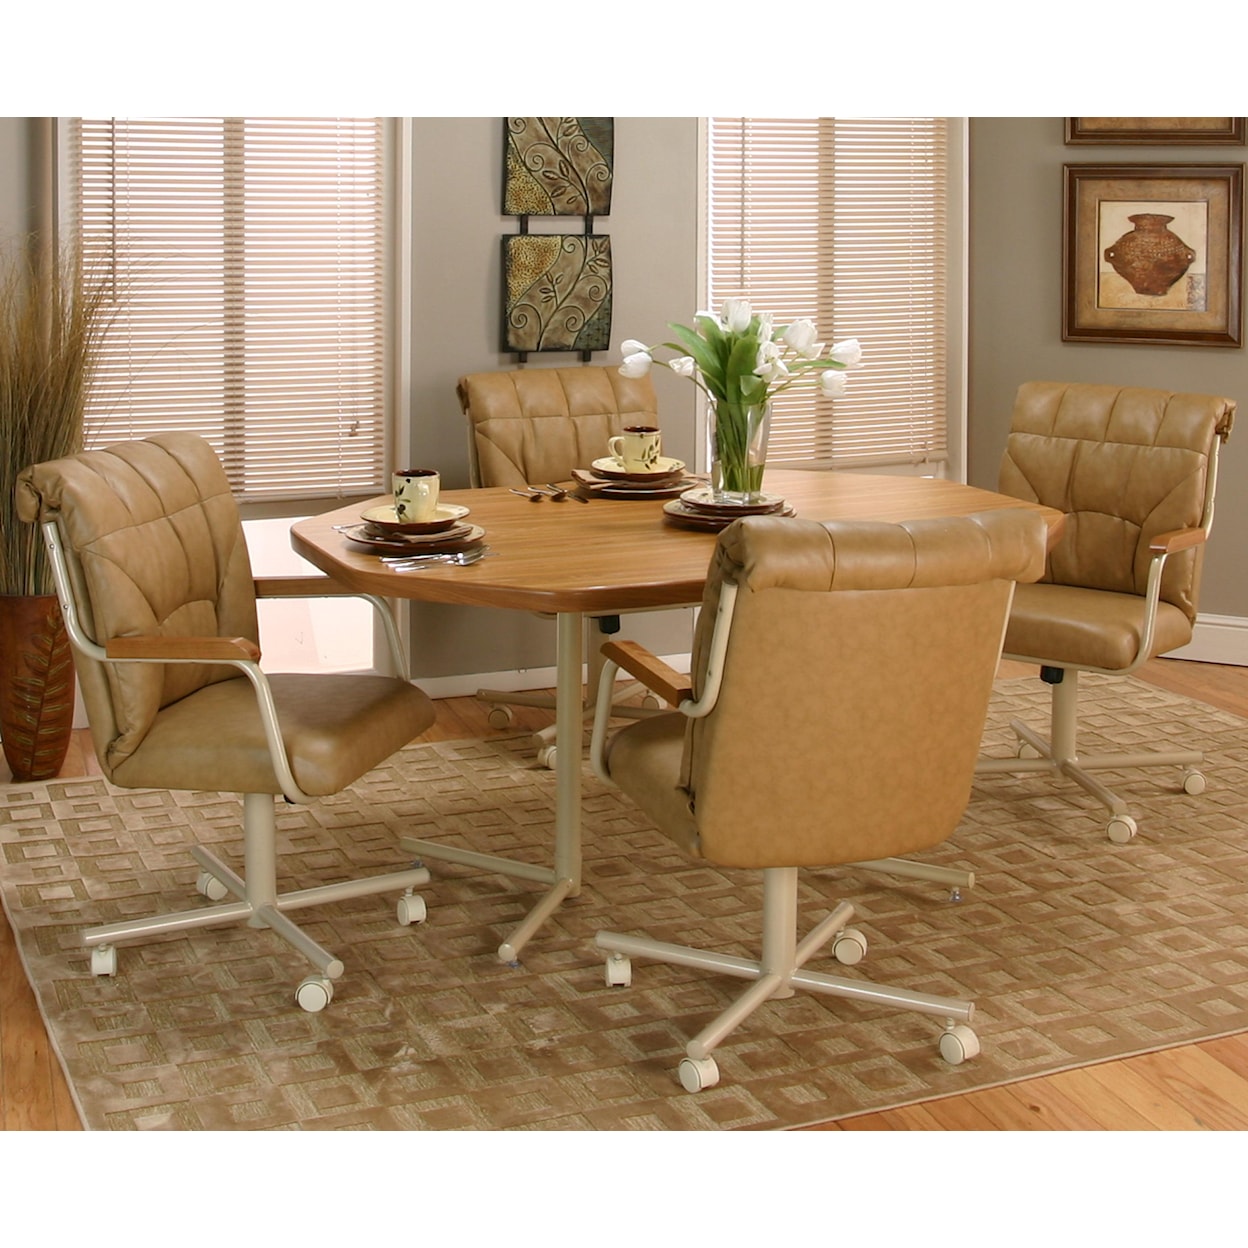 Cramco, Inc Cramco Motion - Marlin 5pc Dining Room Group